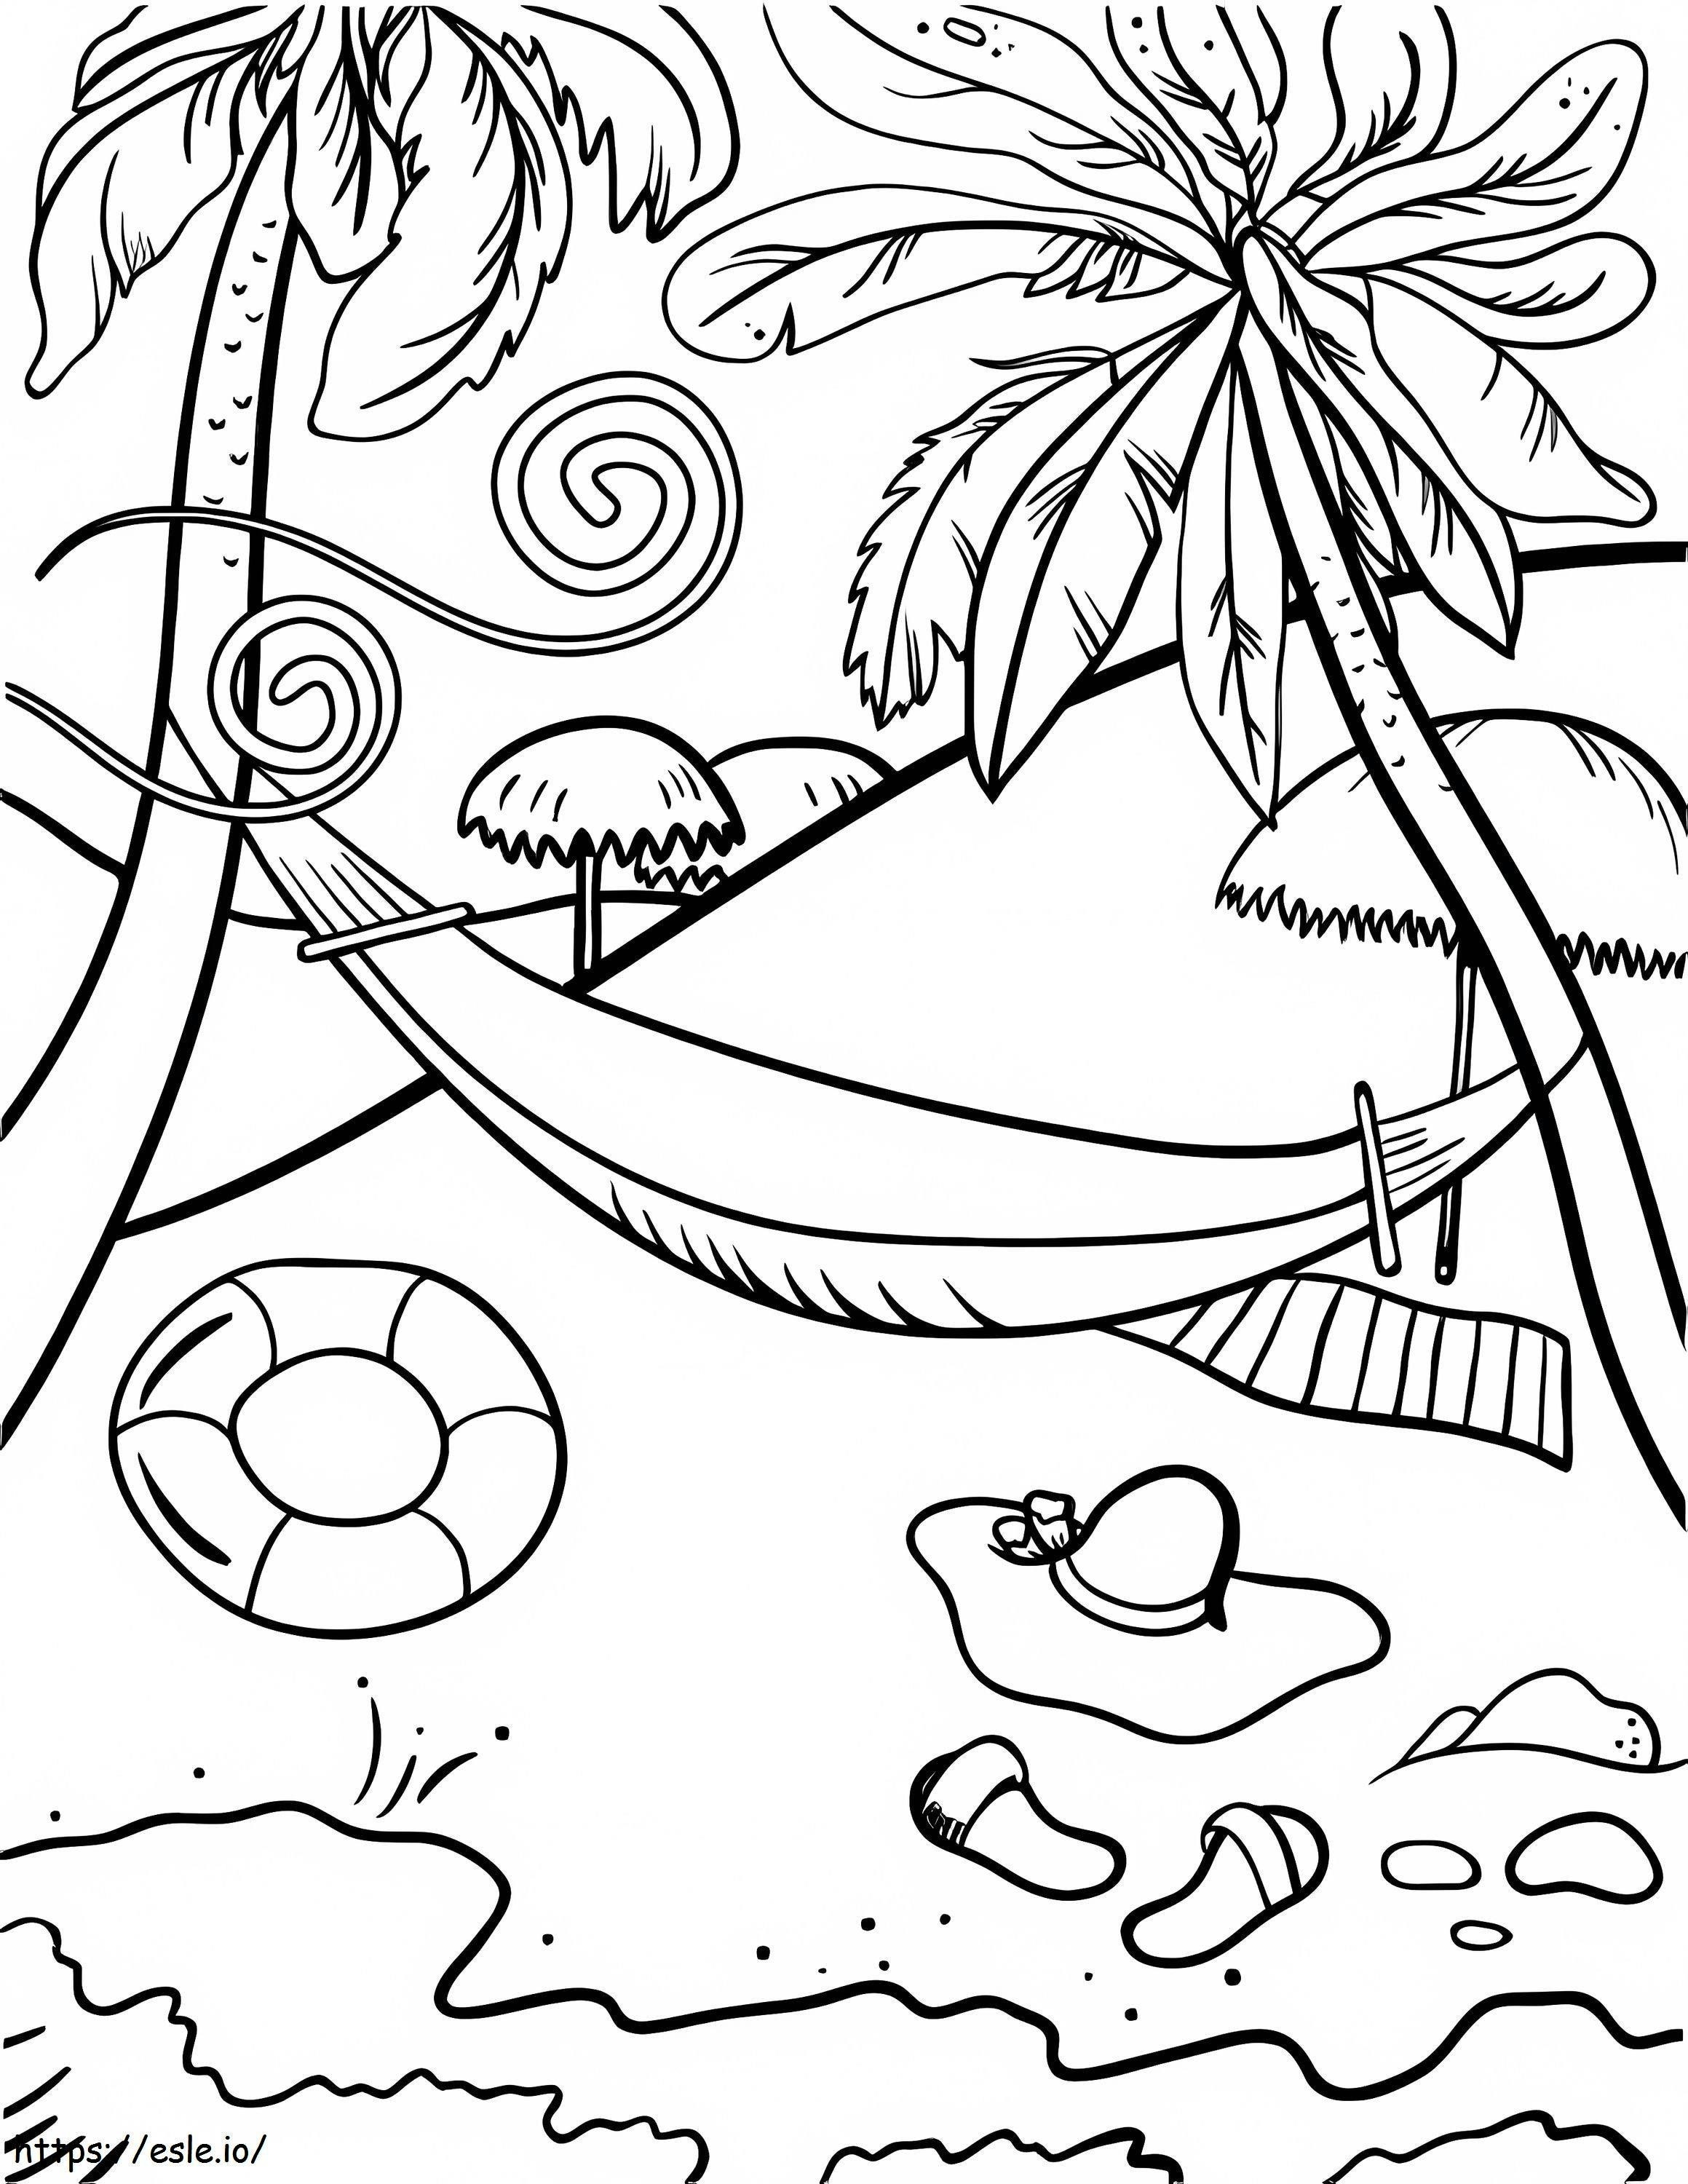 Summer Vacation With A Hammock coloring page